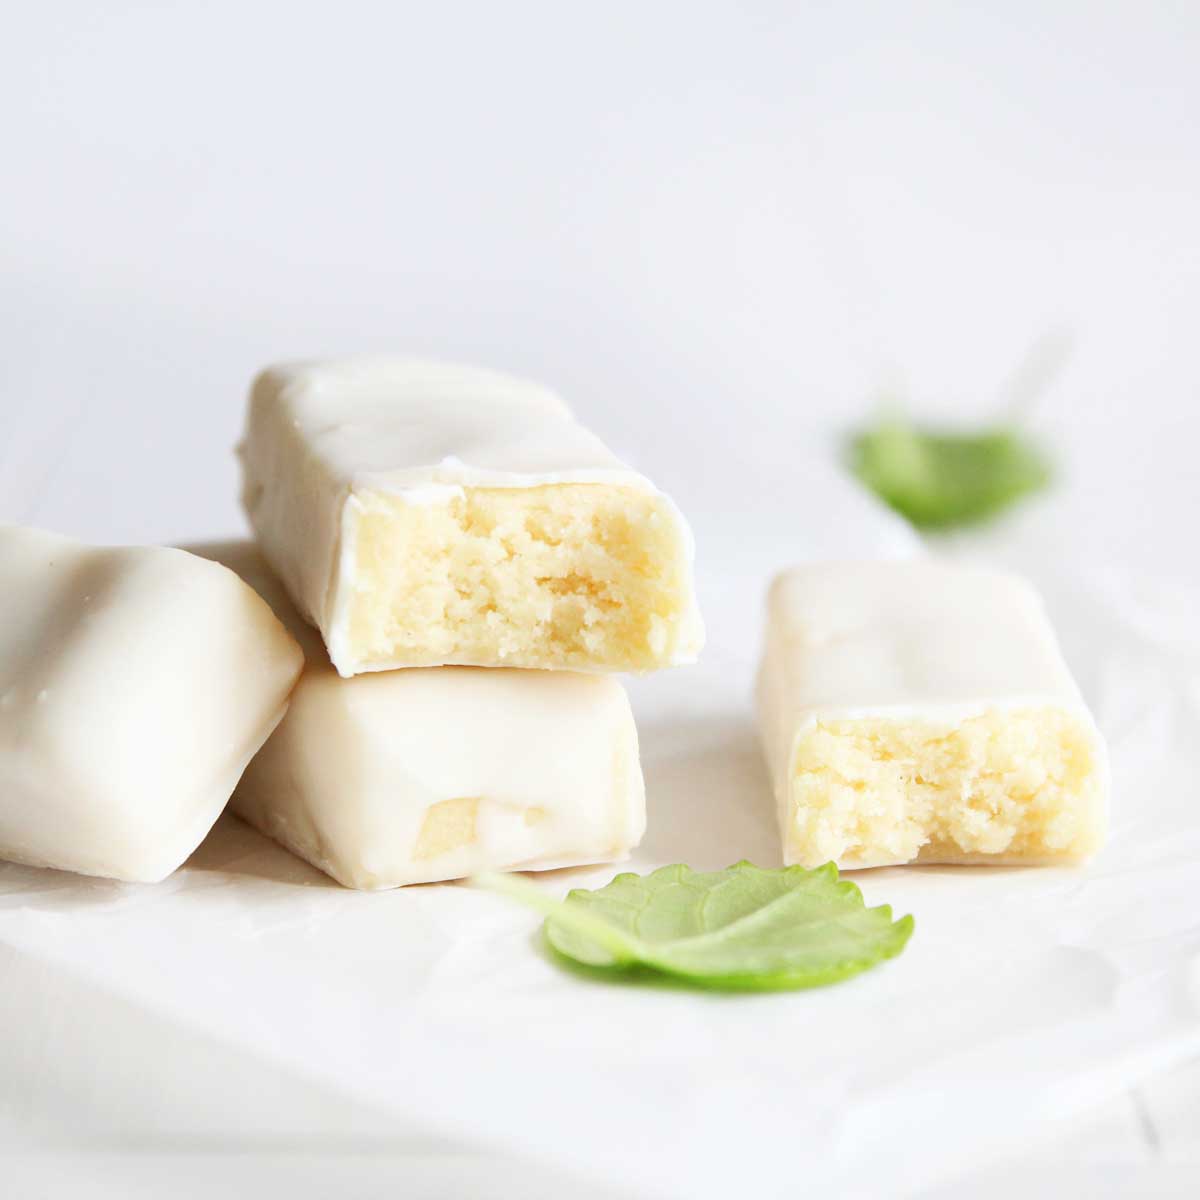 Healthy Homemade Lemon Protein Bars made with Collagen Peptides - Lemon Snow Skin Mooncakes